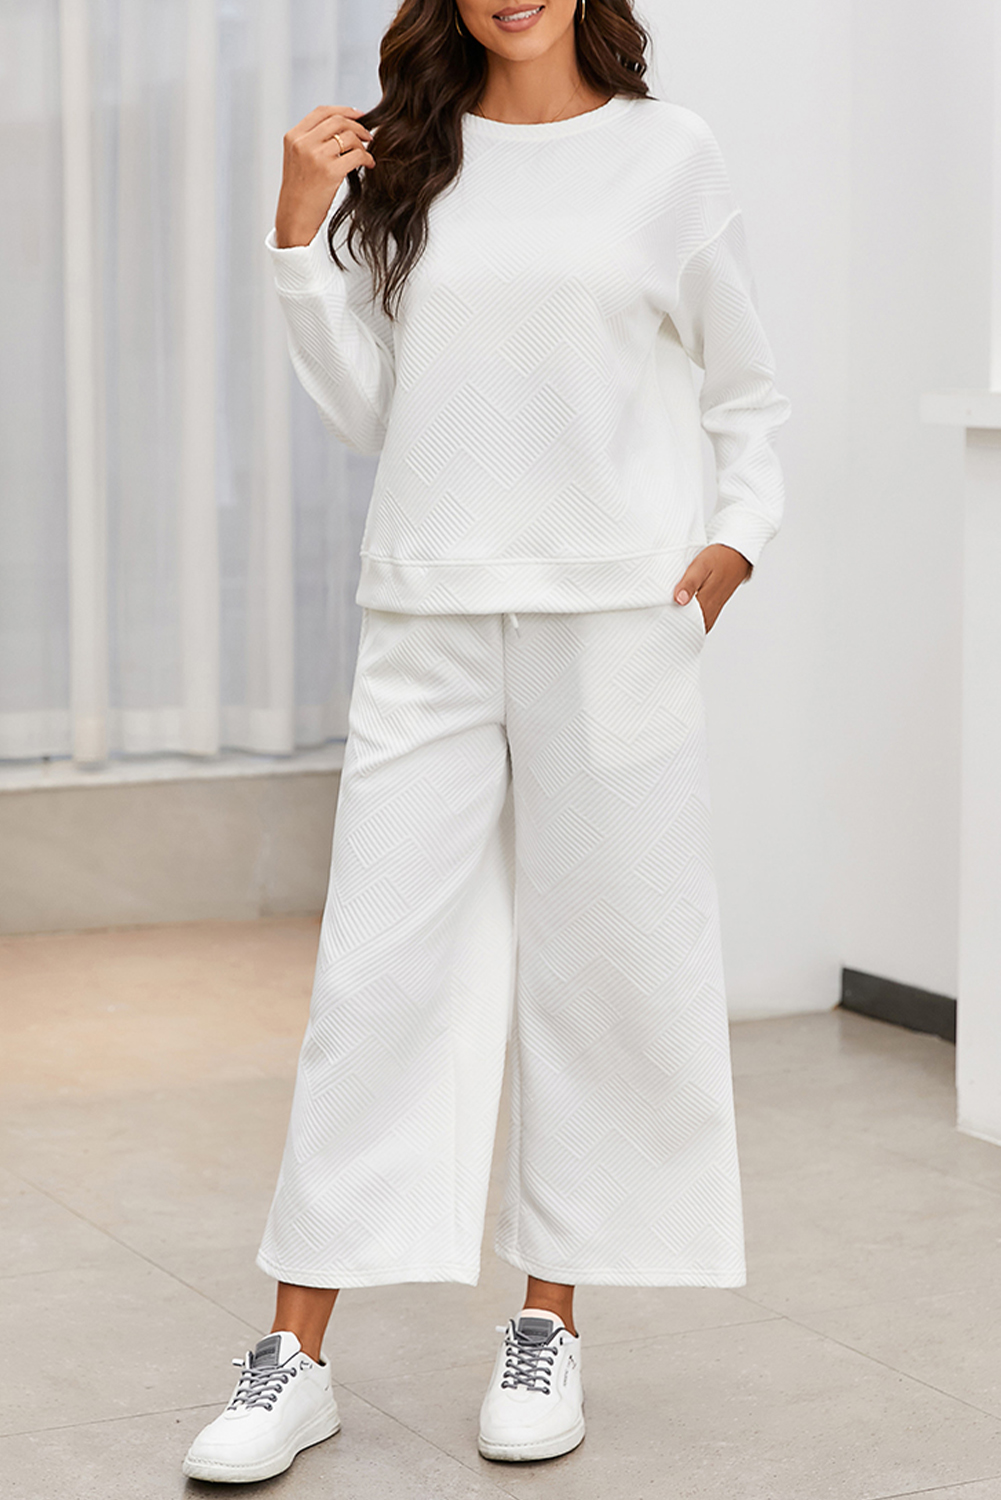 Shewin Wholesale Western Boutique White Textured Loose Slouchy Long Sleeve Top and PANTS Set